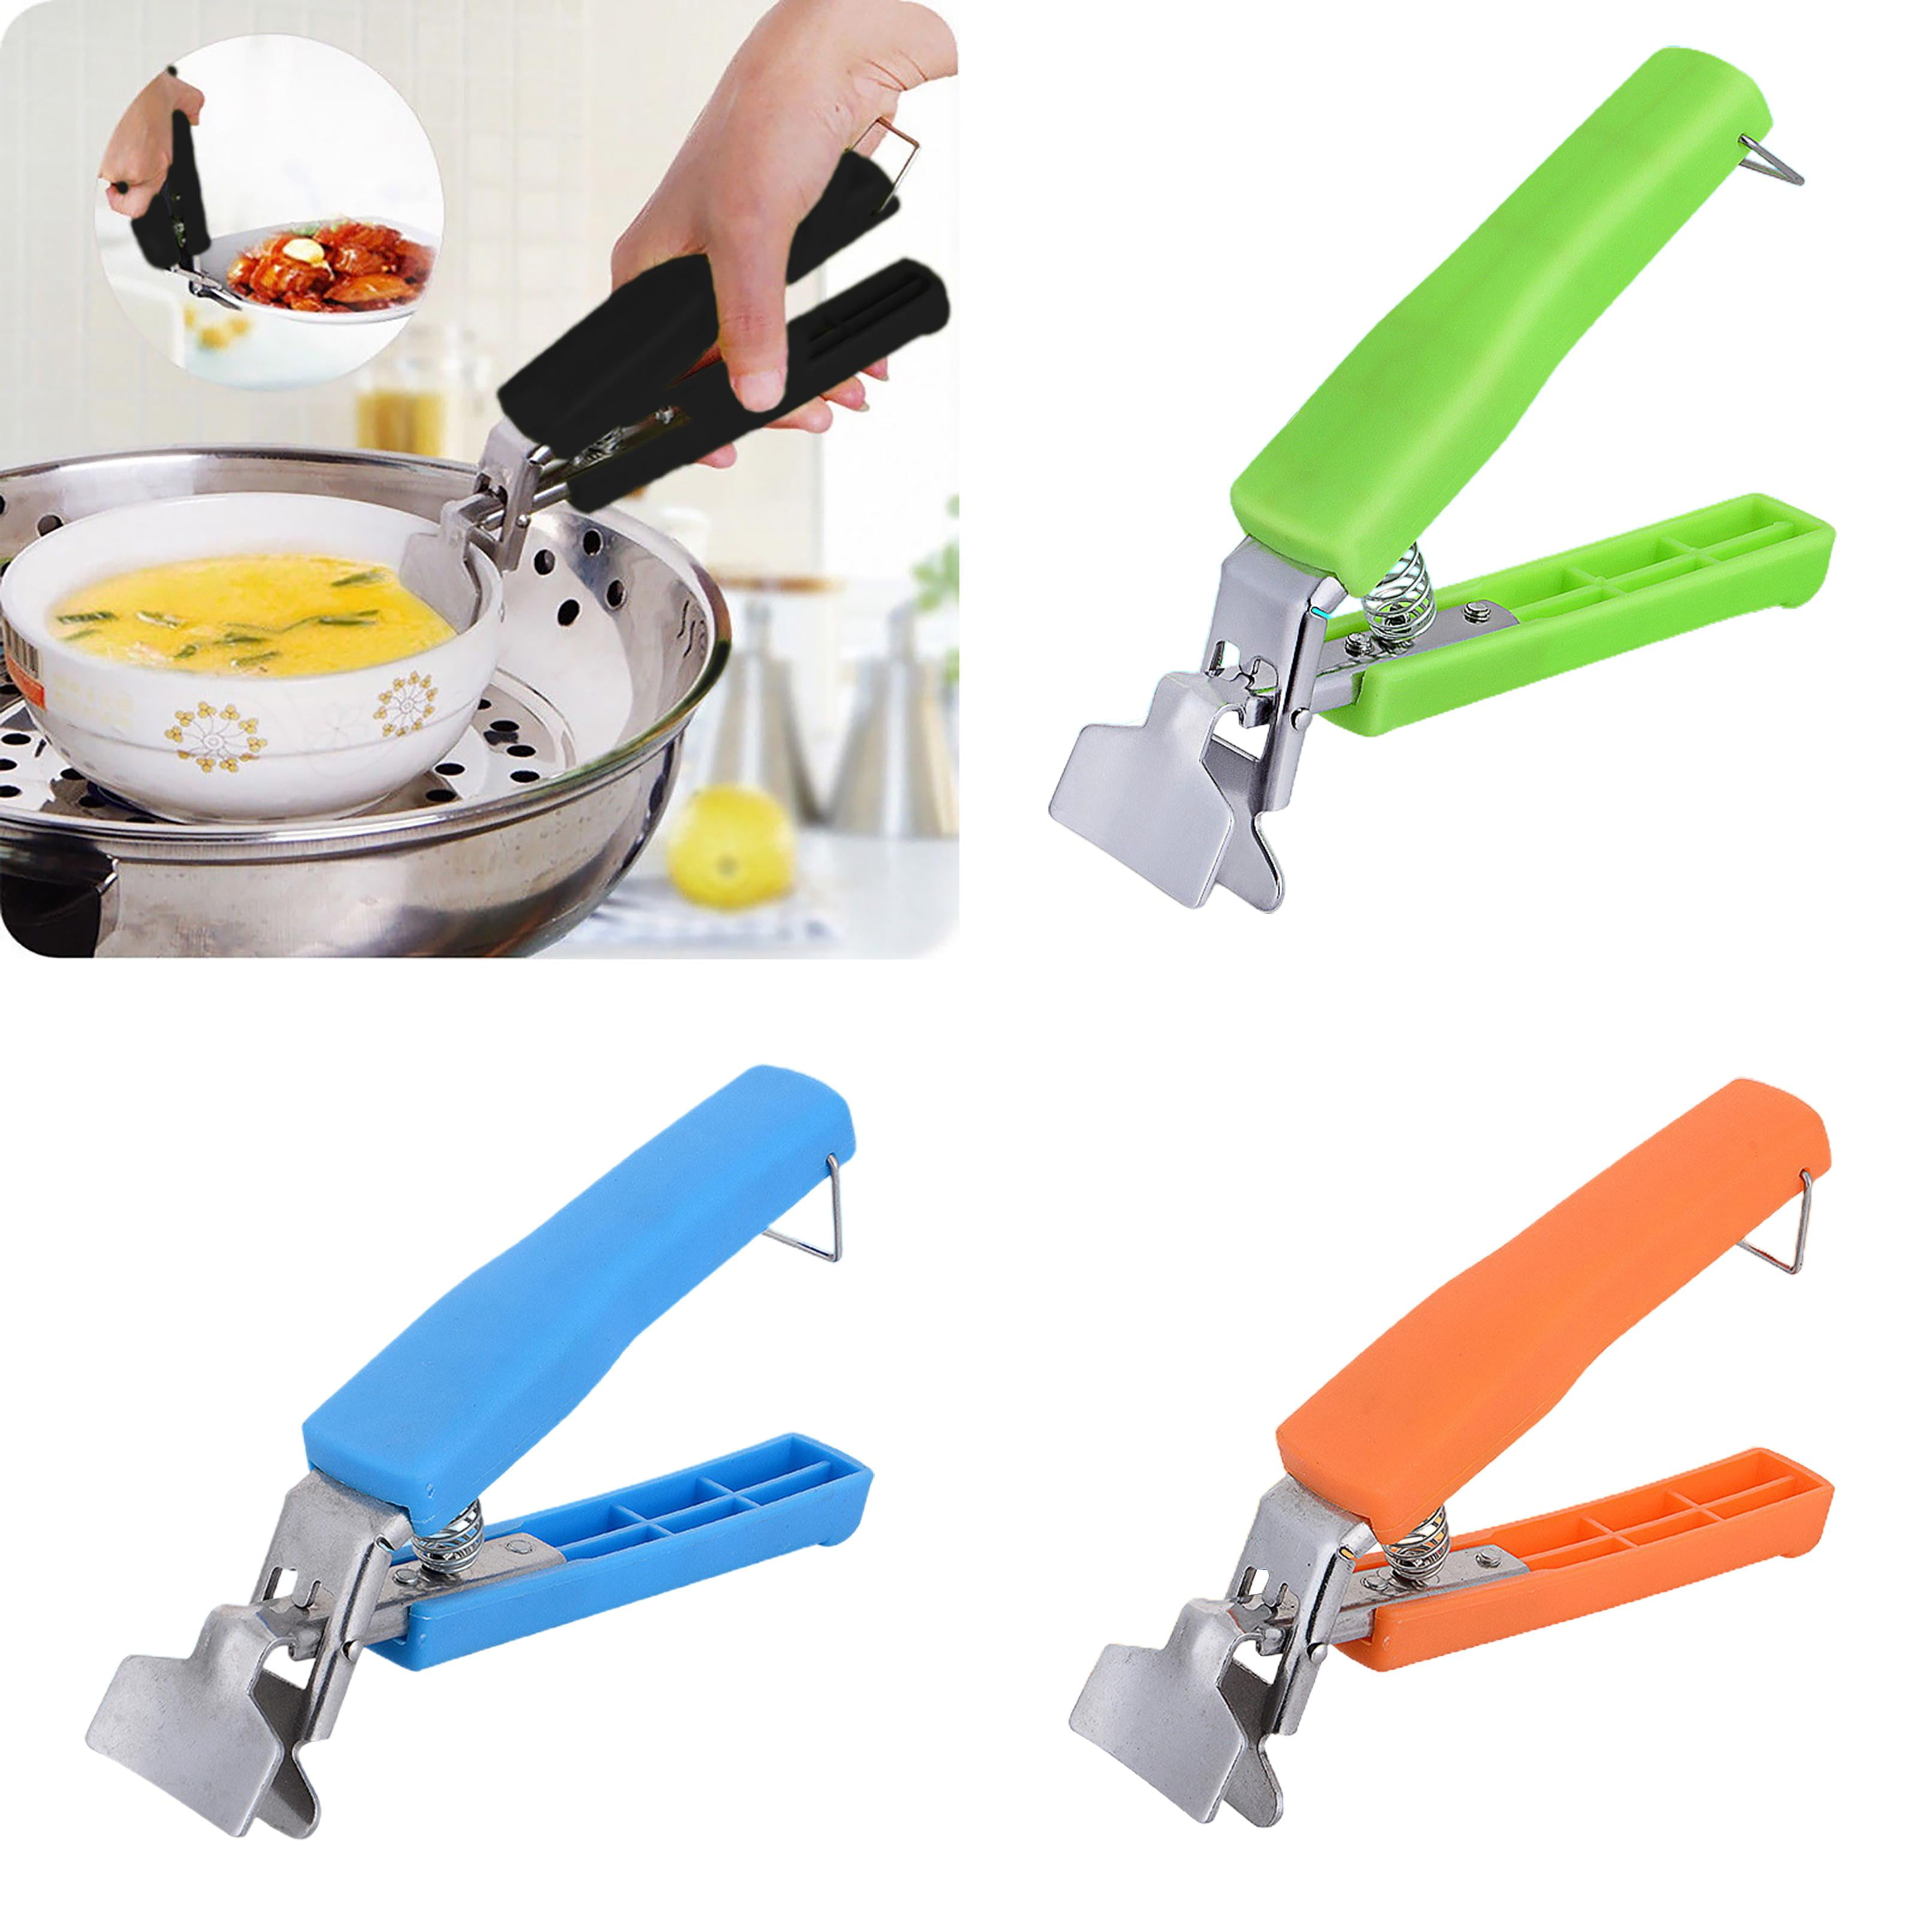 Stainless Steel Pot Pan Gripper Kitchen Tools Dish Plate Gripper Clip  Utensil Clip Holder Dish Clamp Bowl Plate Clamp for Frying Restaurant Style  A 